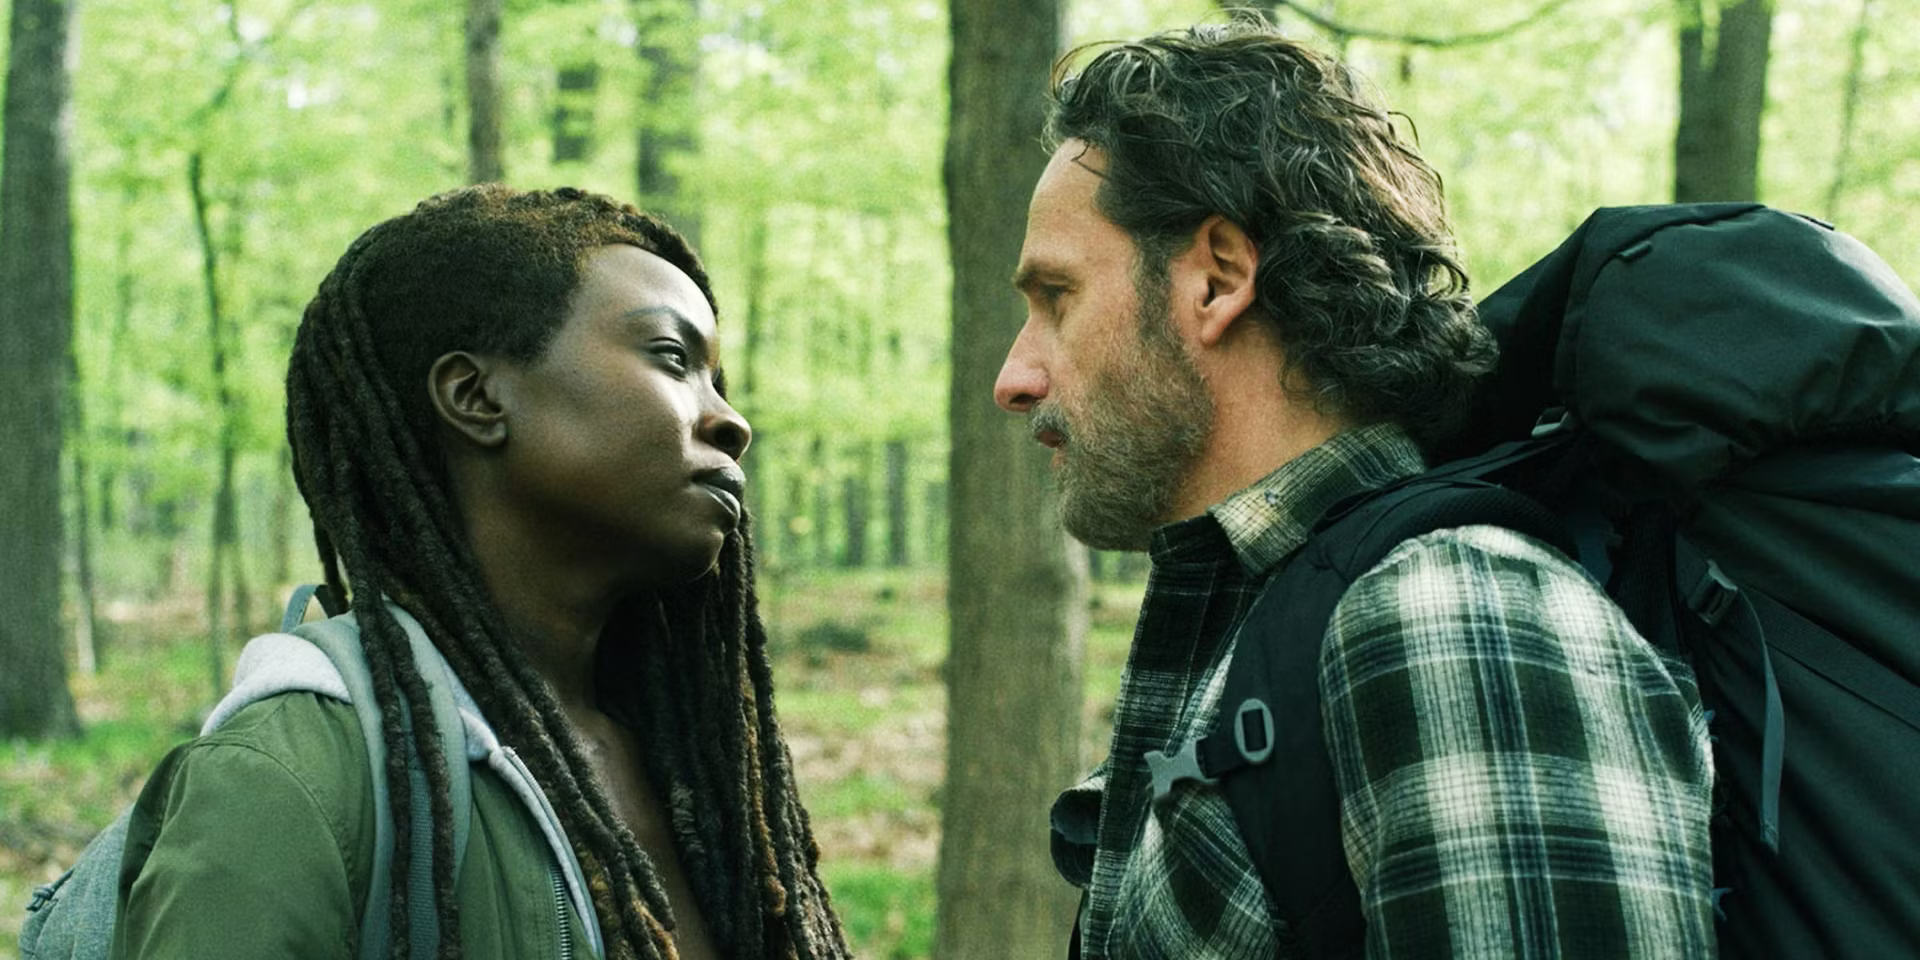 Review: ‘The Walking Dead: The Ones Who Live’ Season 1, Episode 5 “Become”